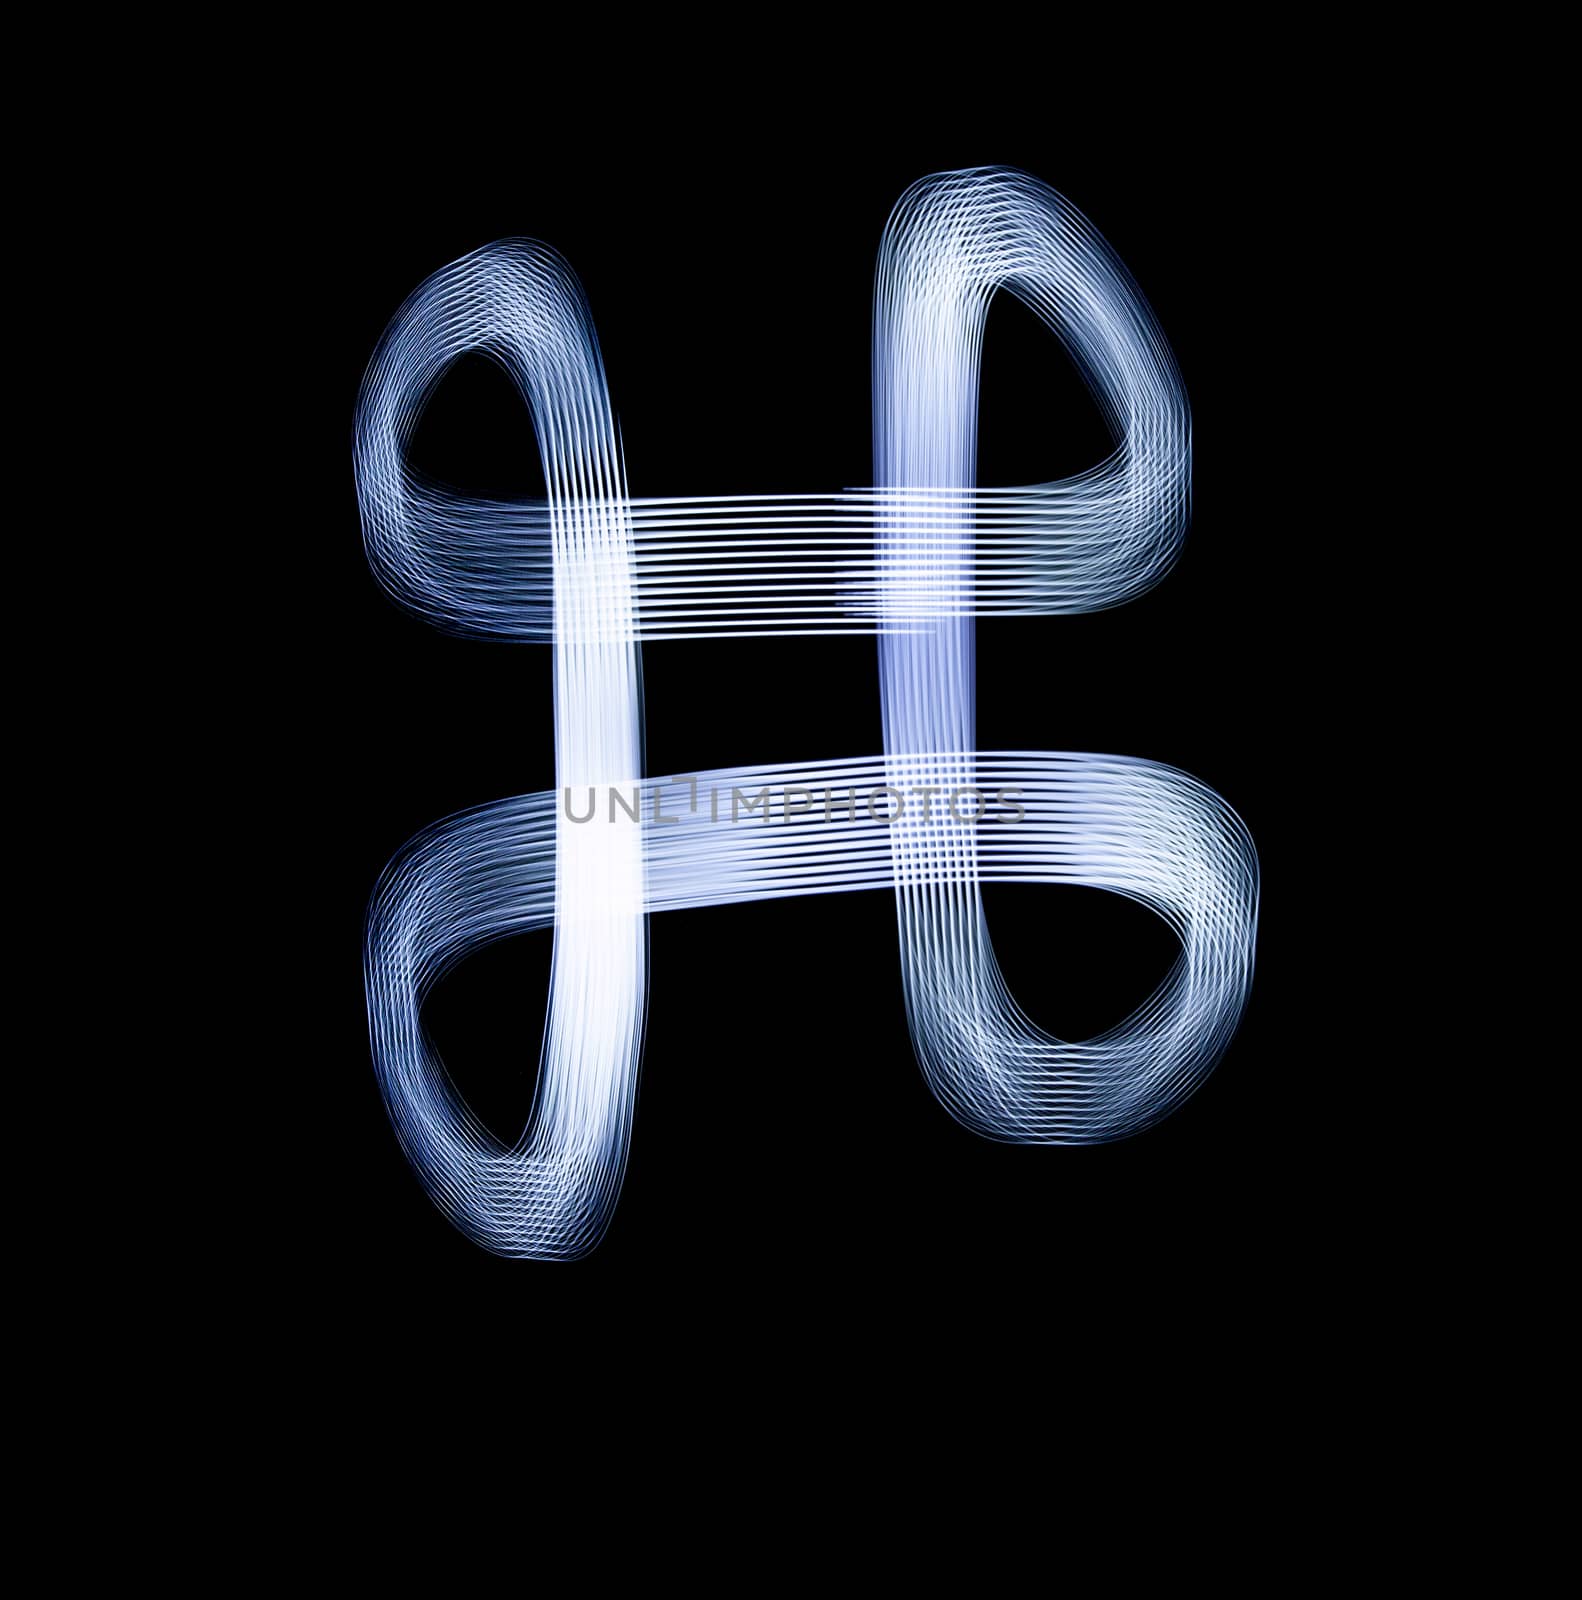 Command Key Symbol Icon Using Light Painting Technique isolated over black Background